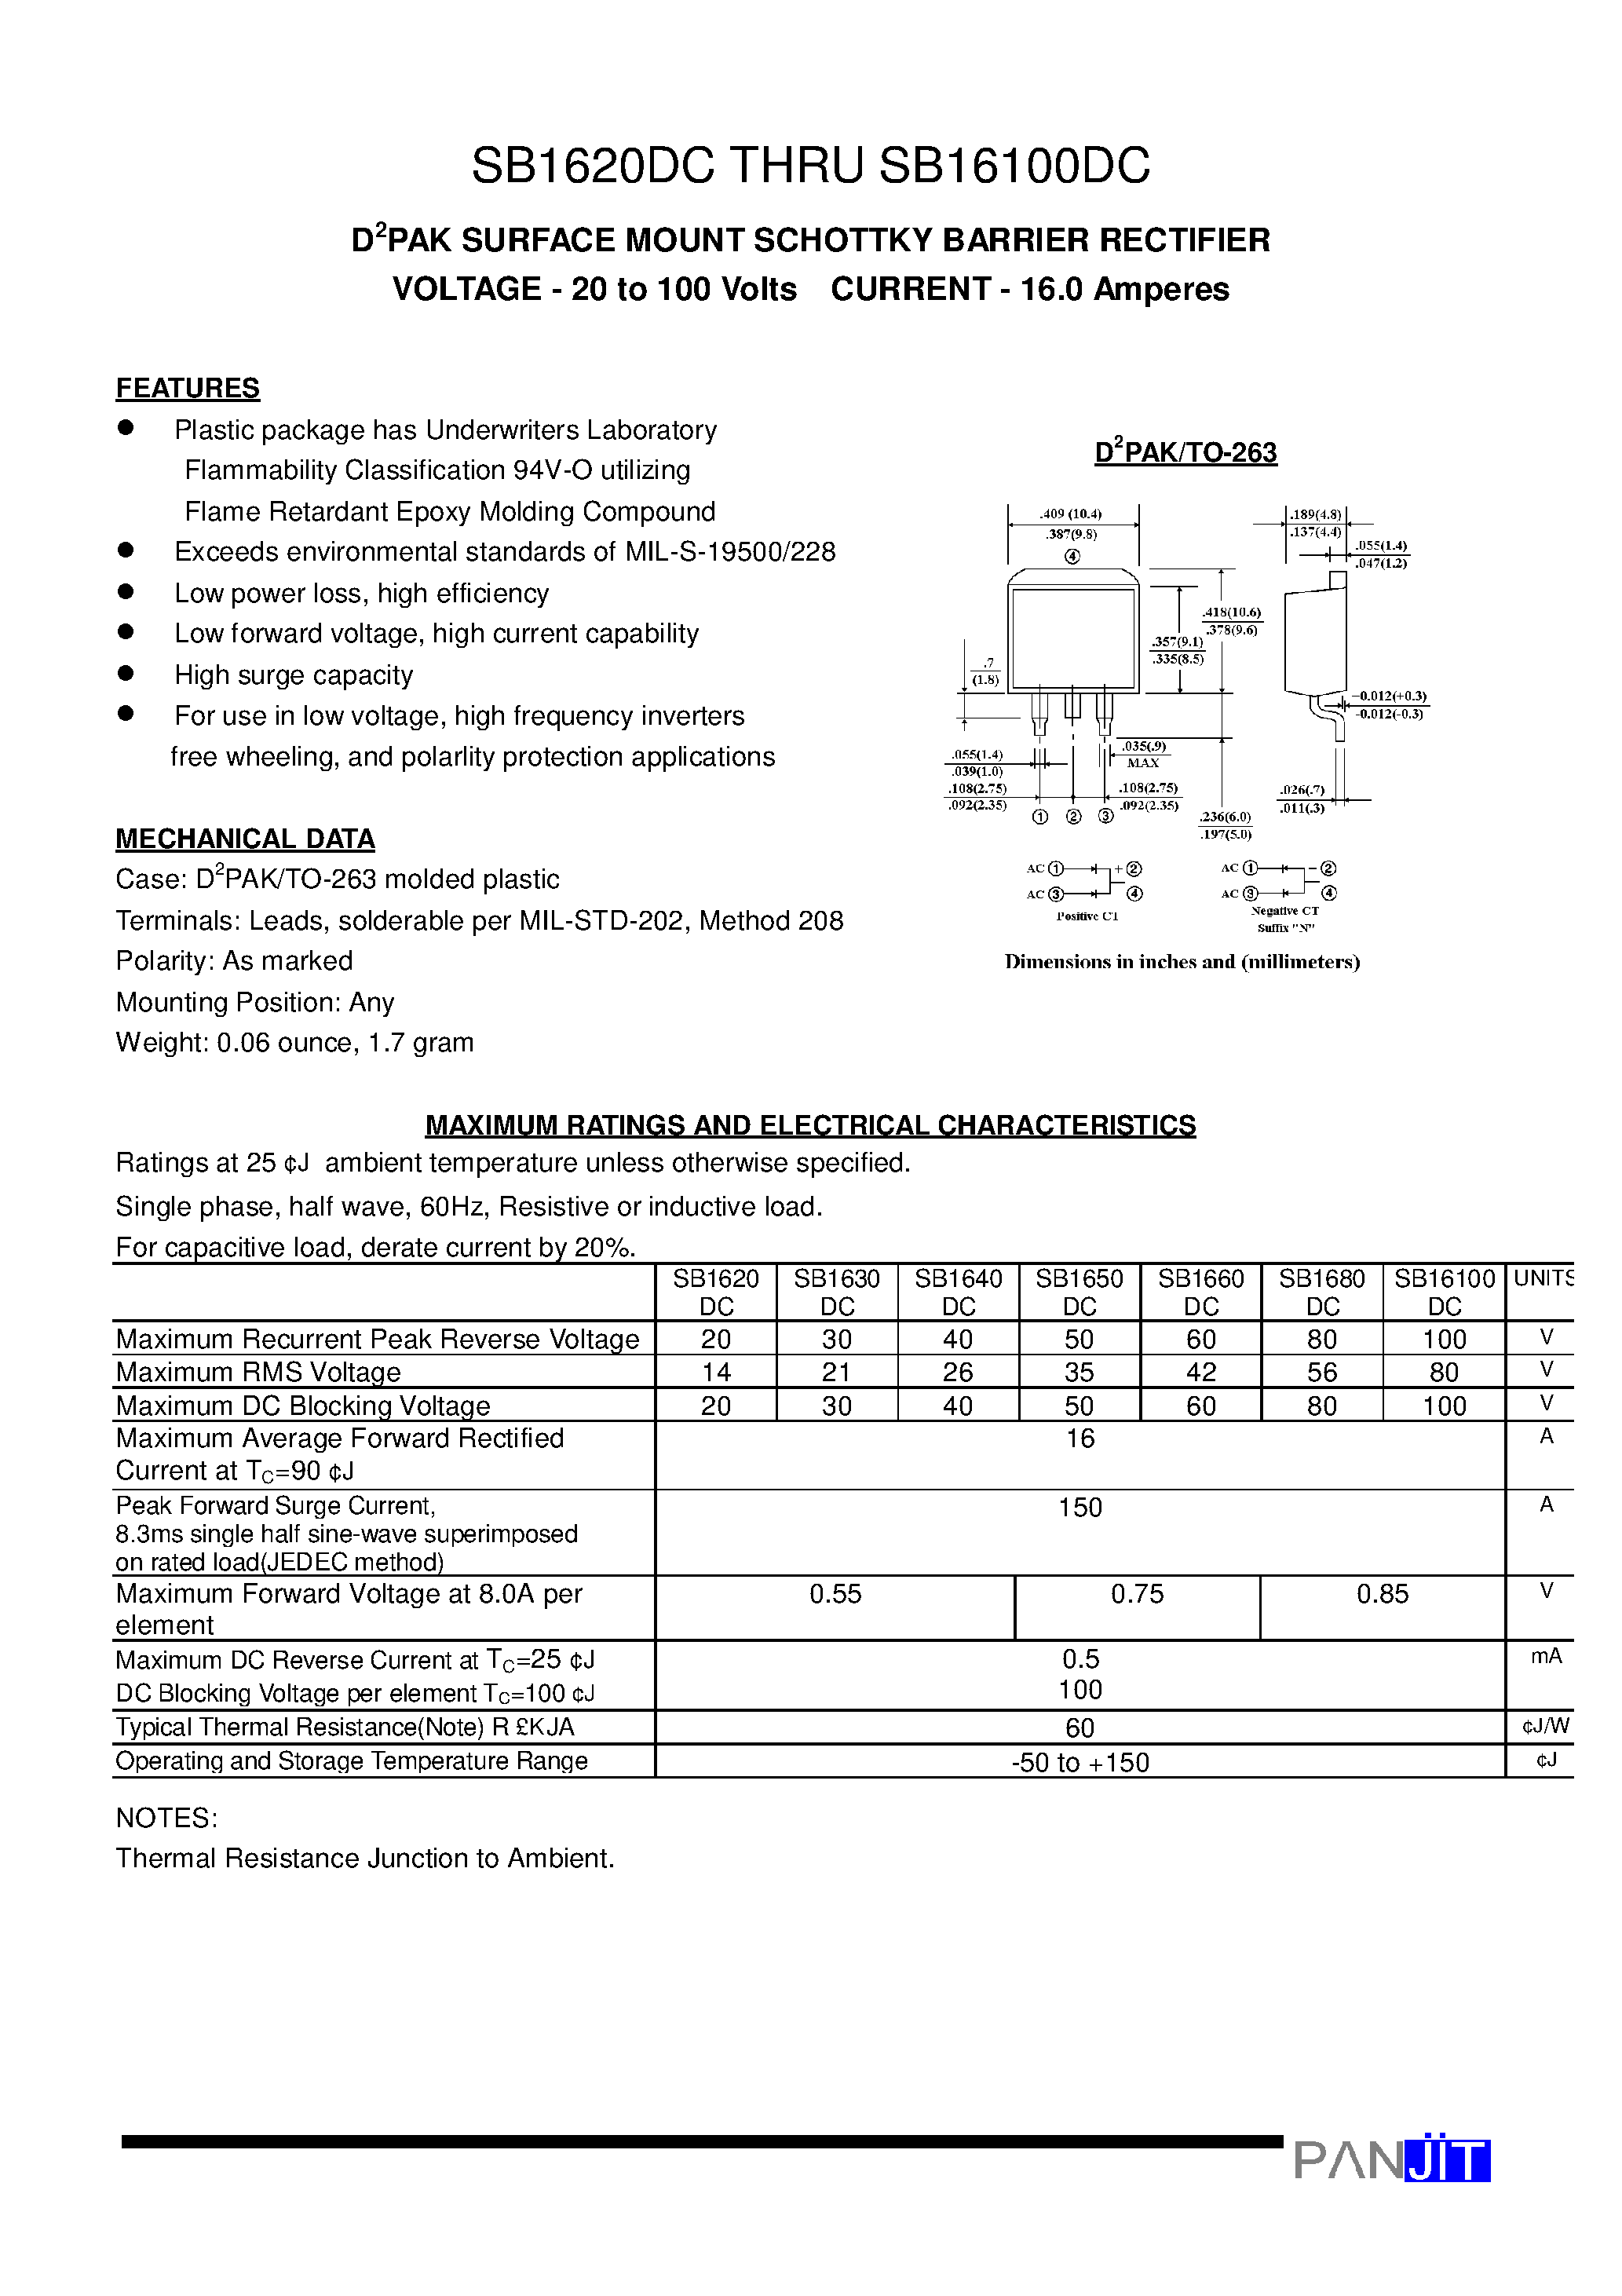 Datasheet SB1680DC - D2PAK SURFACE MOUNT SCHOTTKY BARRIER RECTIFIER(VOLTAGE - 20 to 100 Volts CURRENT - 16.0 Amperes) page 1